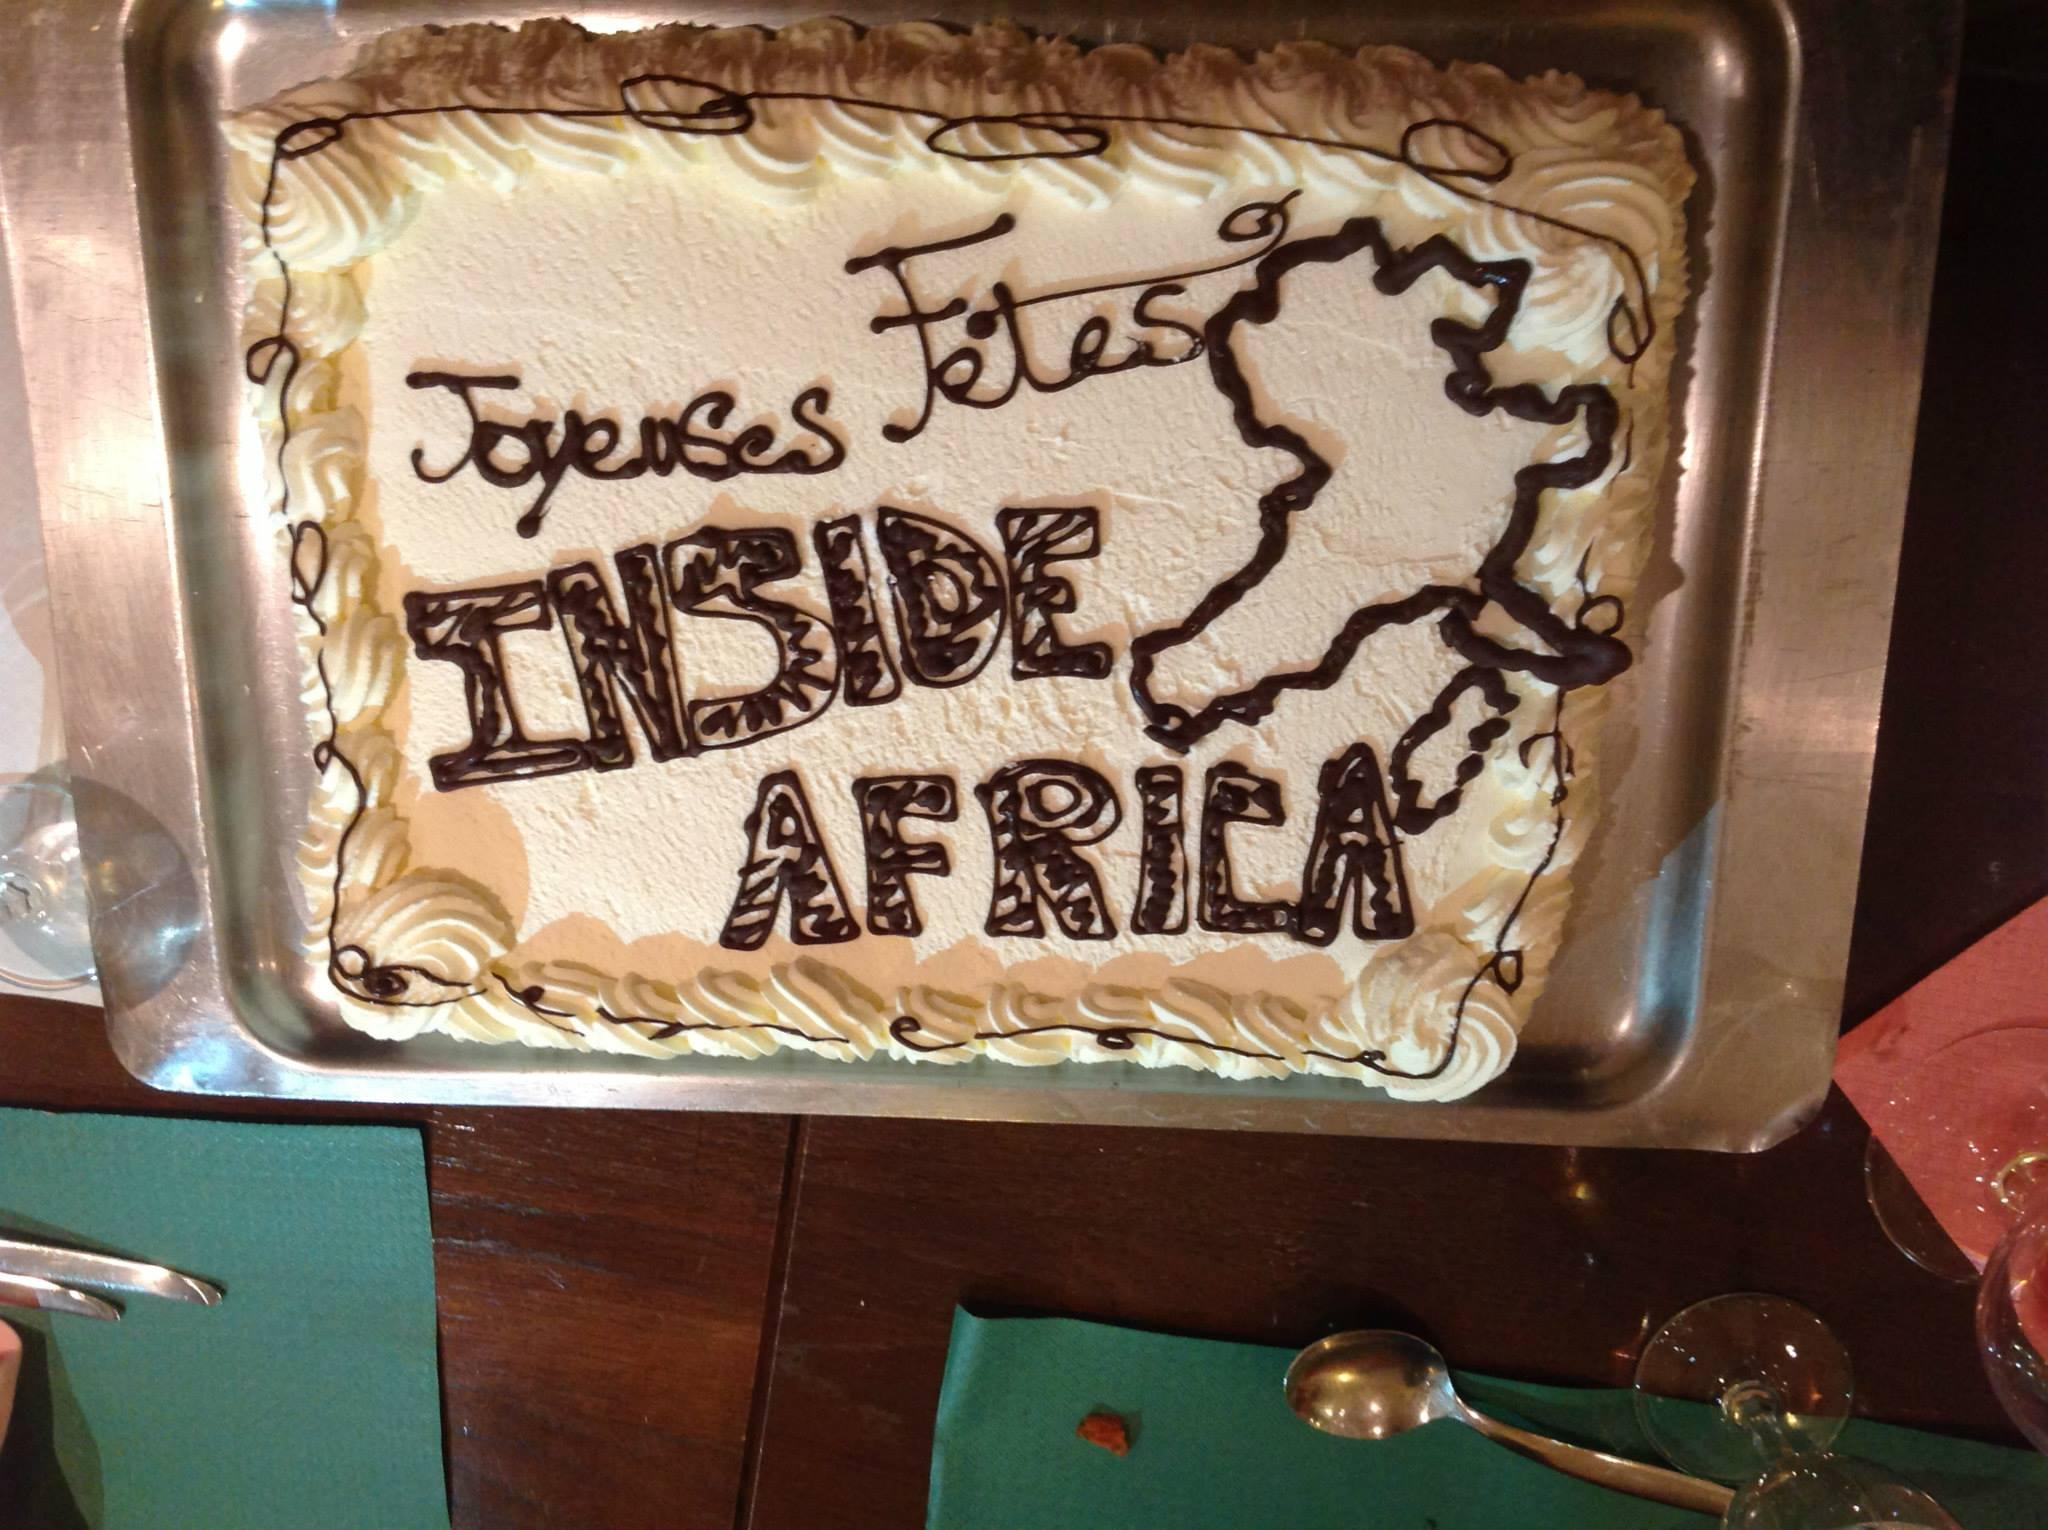 Cake decorated with a picture of Africa with the words "Joyeuses Fetes Inside Africa"